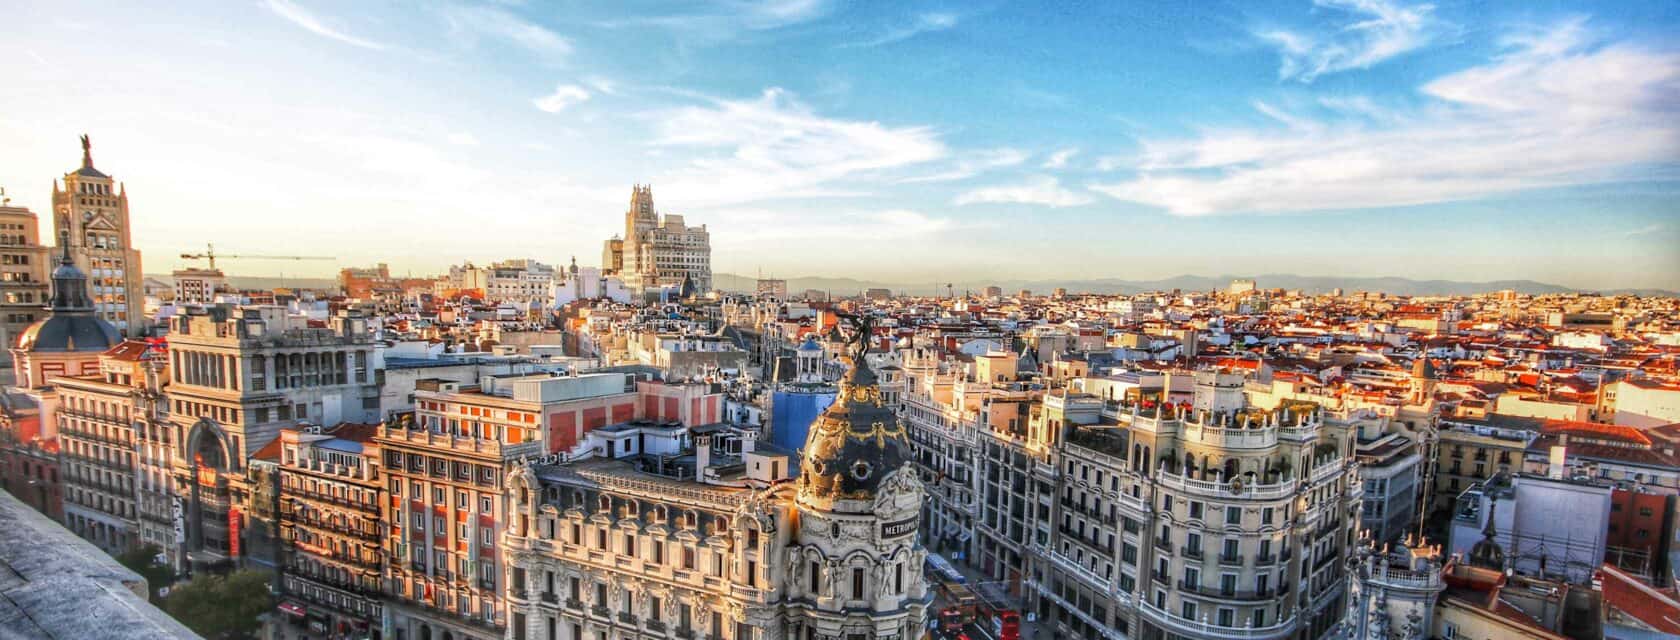 A view of the rooftops of the city of Madrid. (